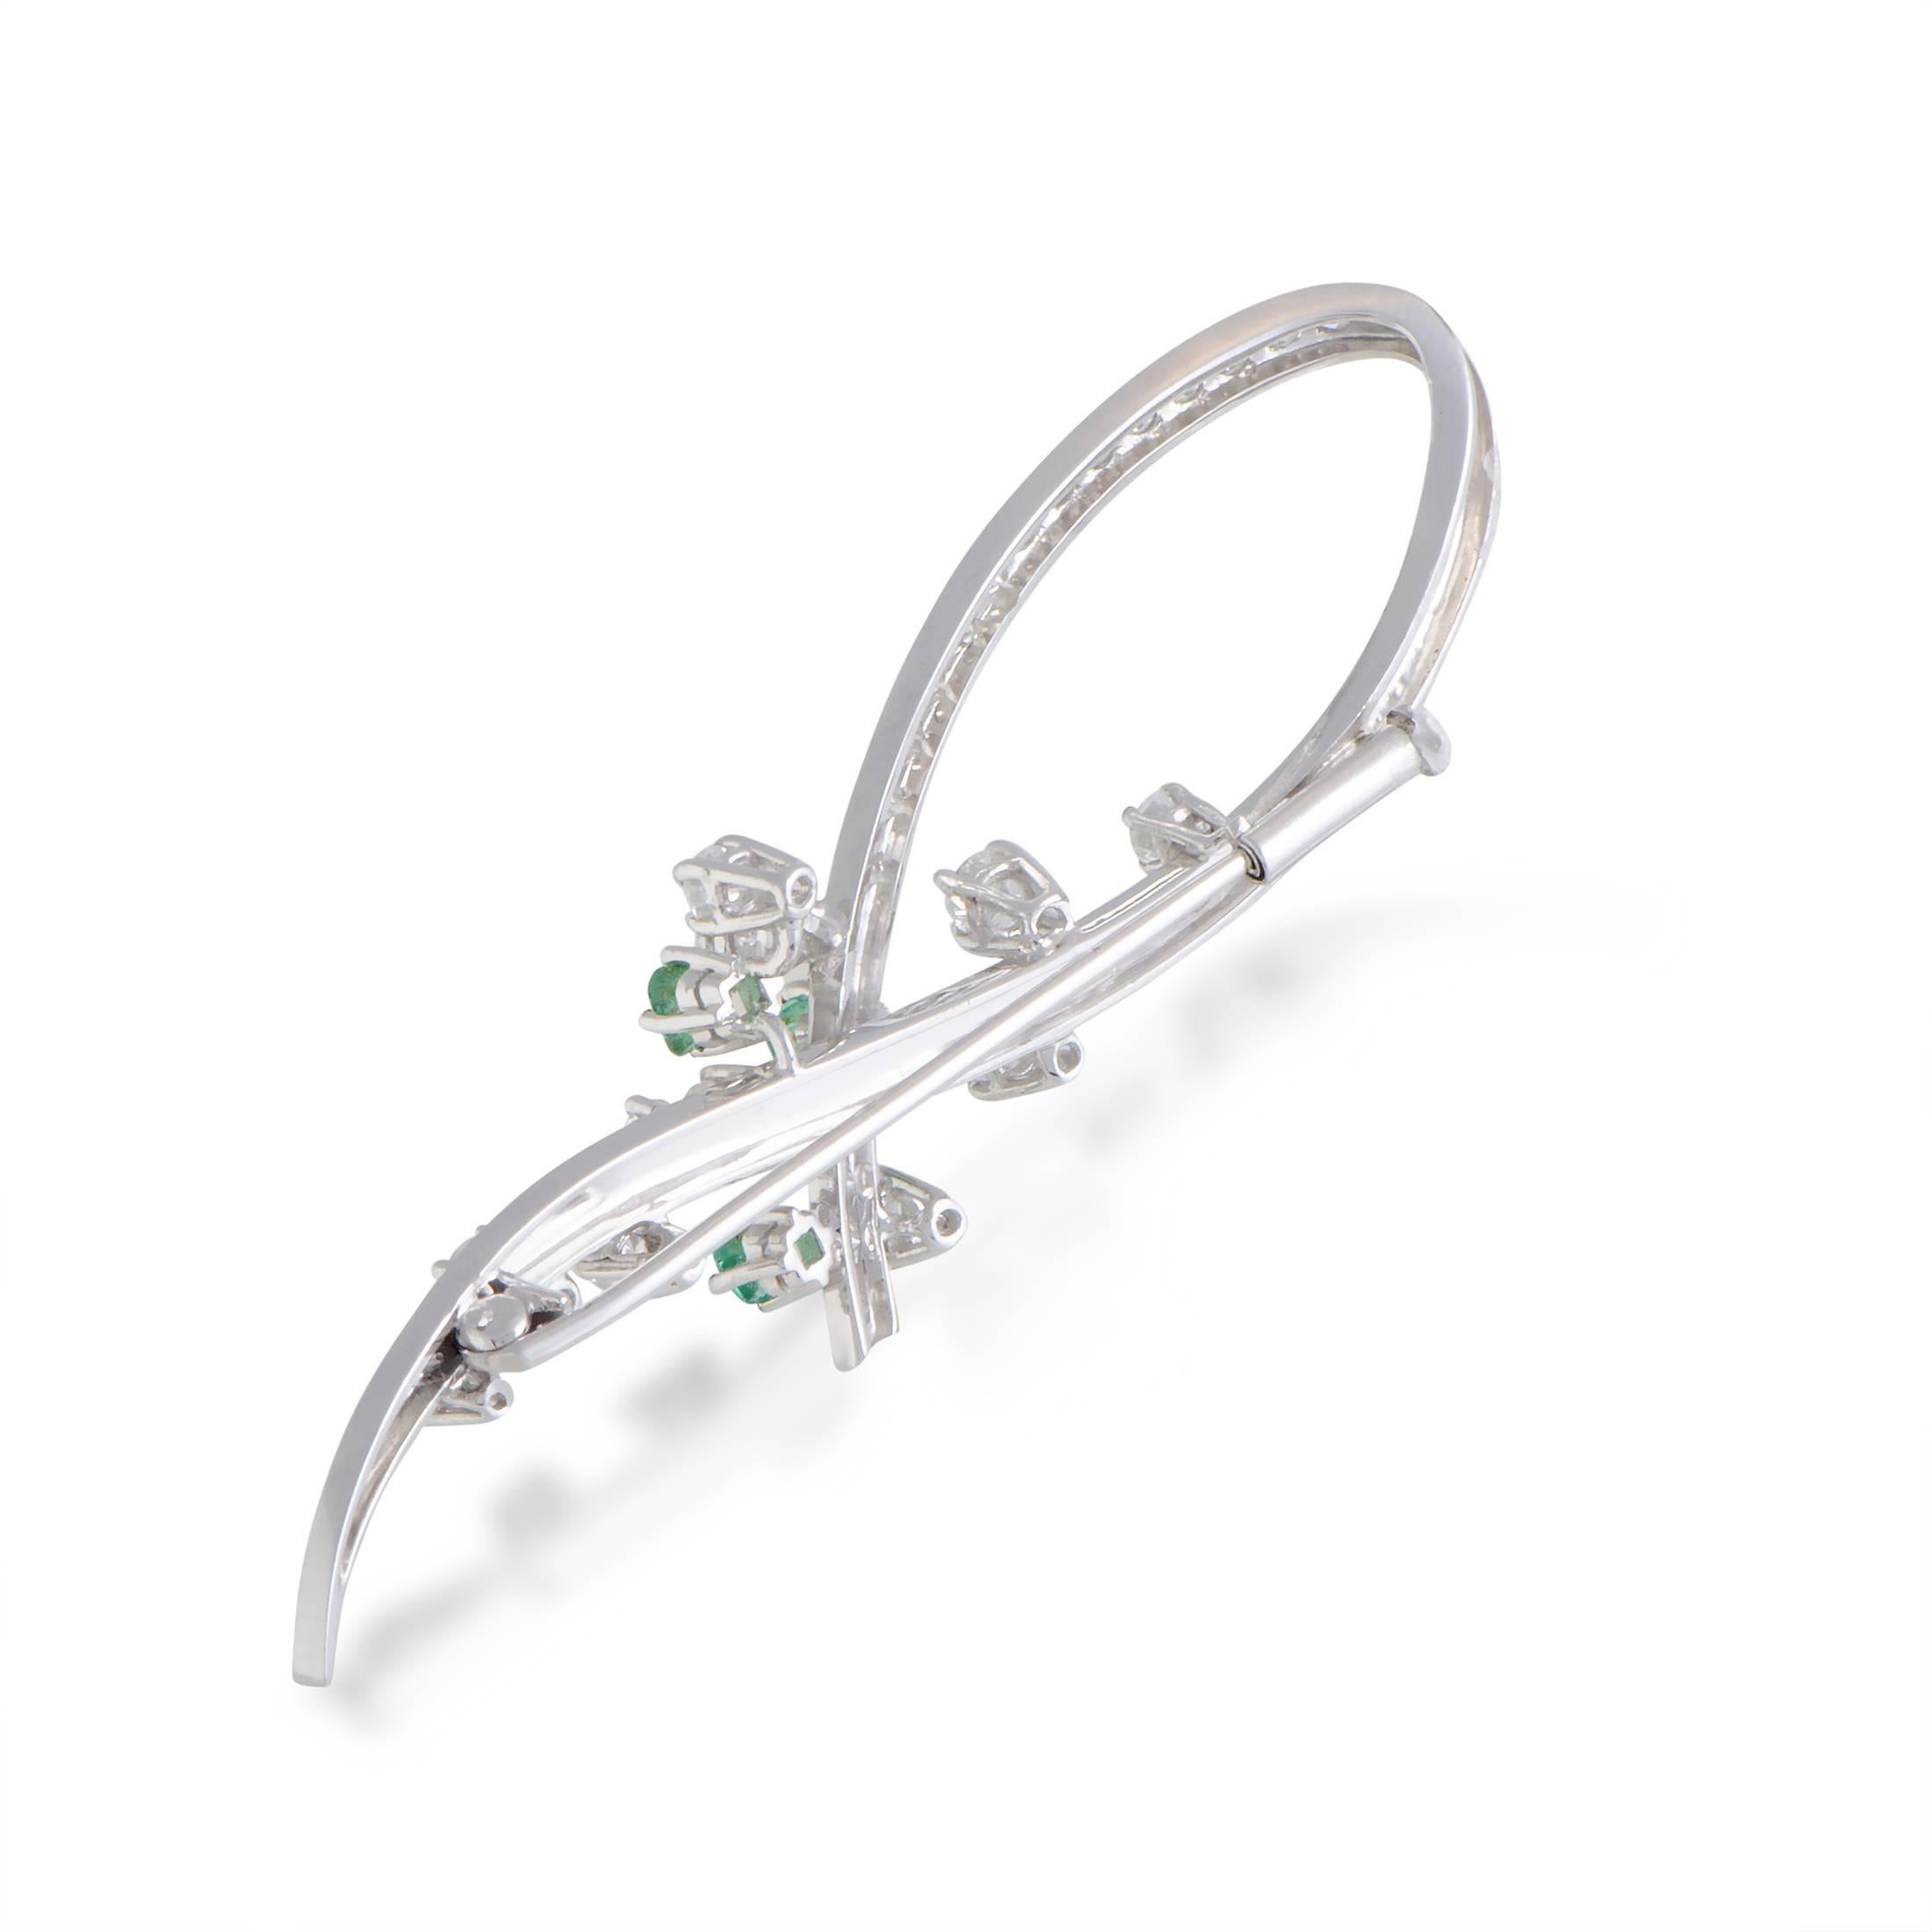 This beautiful 18K white gold brooch perfectly epitomizes elegance and class. The spectacular design includes a stunning blend of 1.10ct of diamonds and mesmerizing 0.50ct of emeralds that give the brooch an extravagantly stylish appeal.
